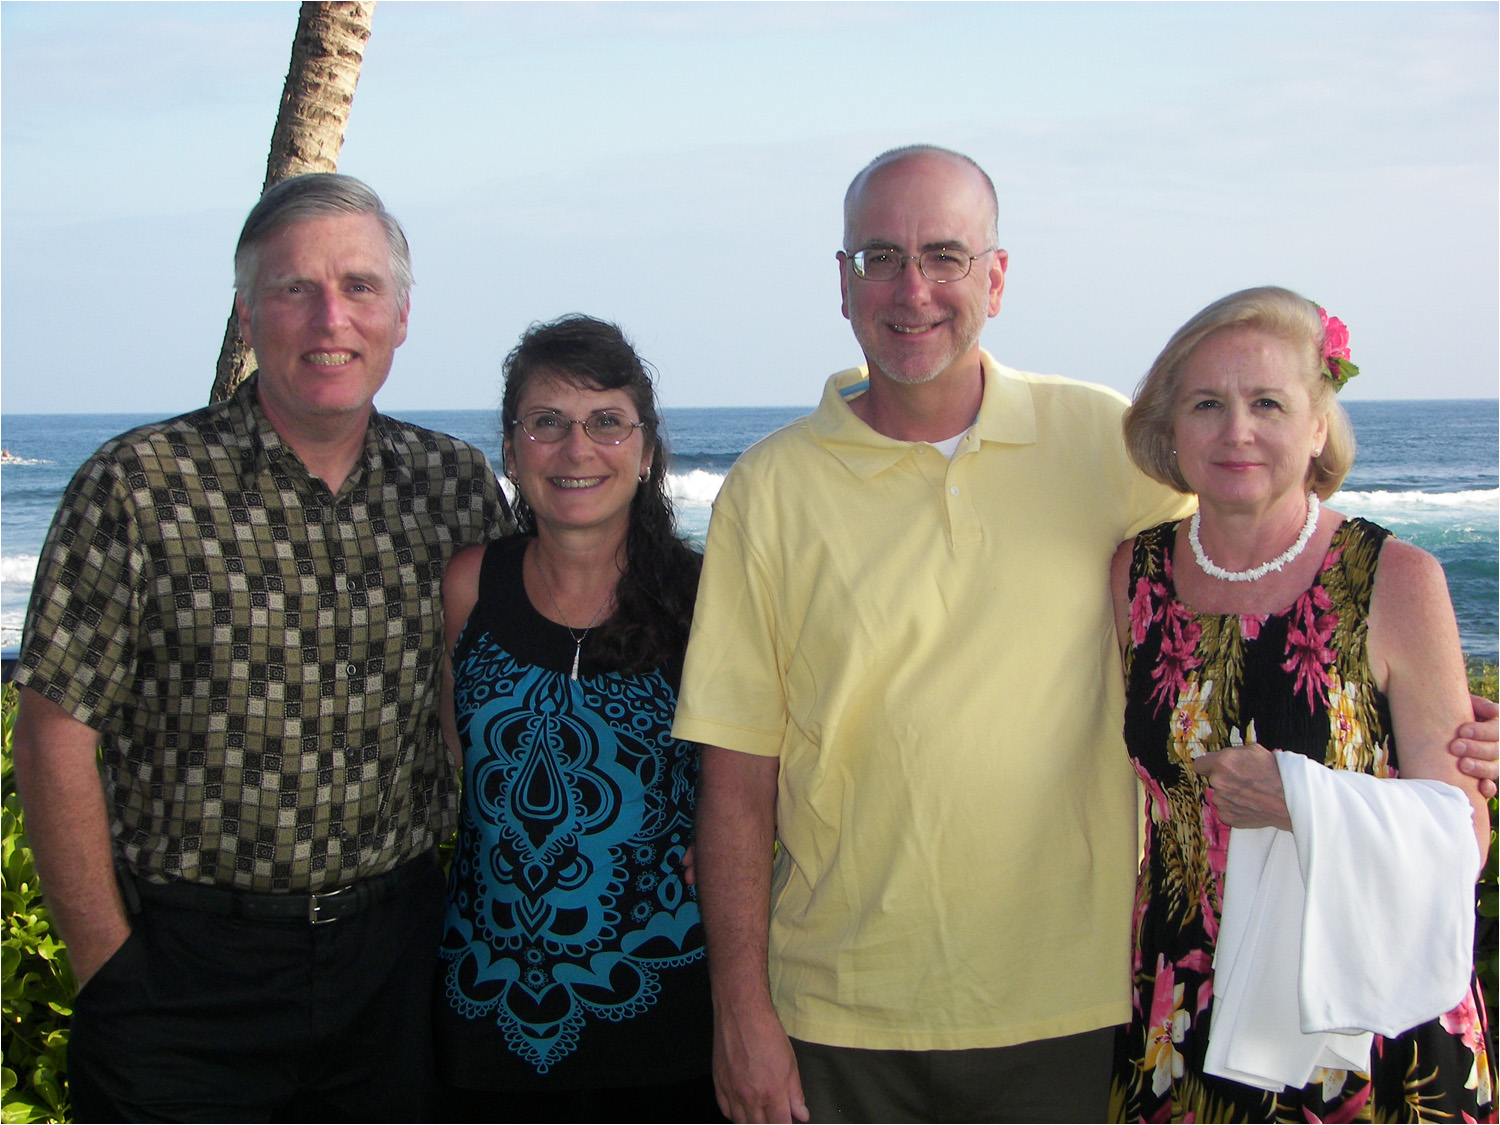 L-R, Bob and Katherine Franklin, John and Ginny Burrall.  Picture taken on unit #6 lanai